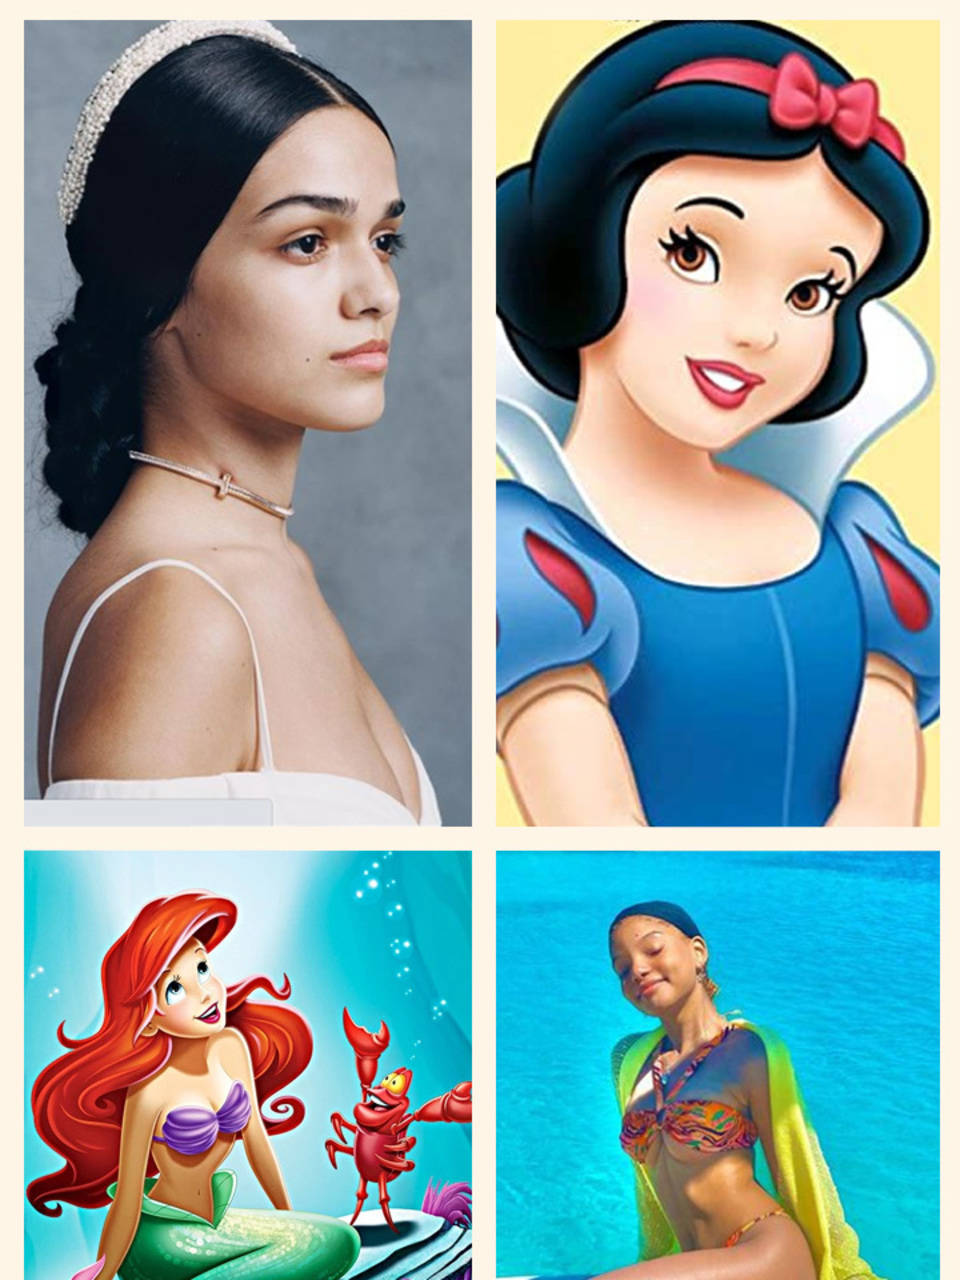 Disney Movies: Snow White to Little Mermaid: Disney live-action movies that  will make you relive your childhood | Times of India